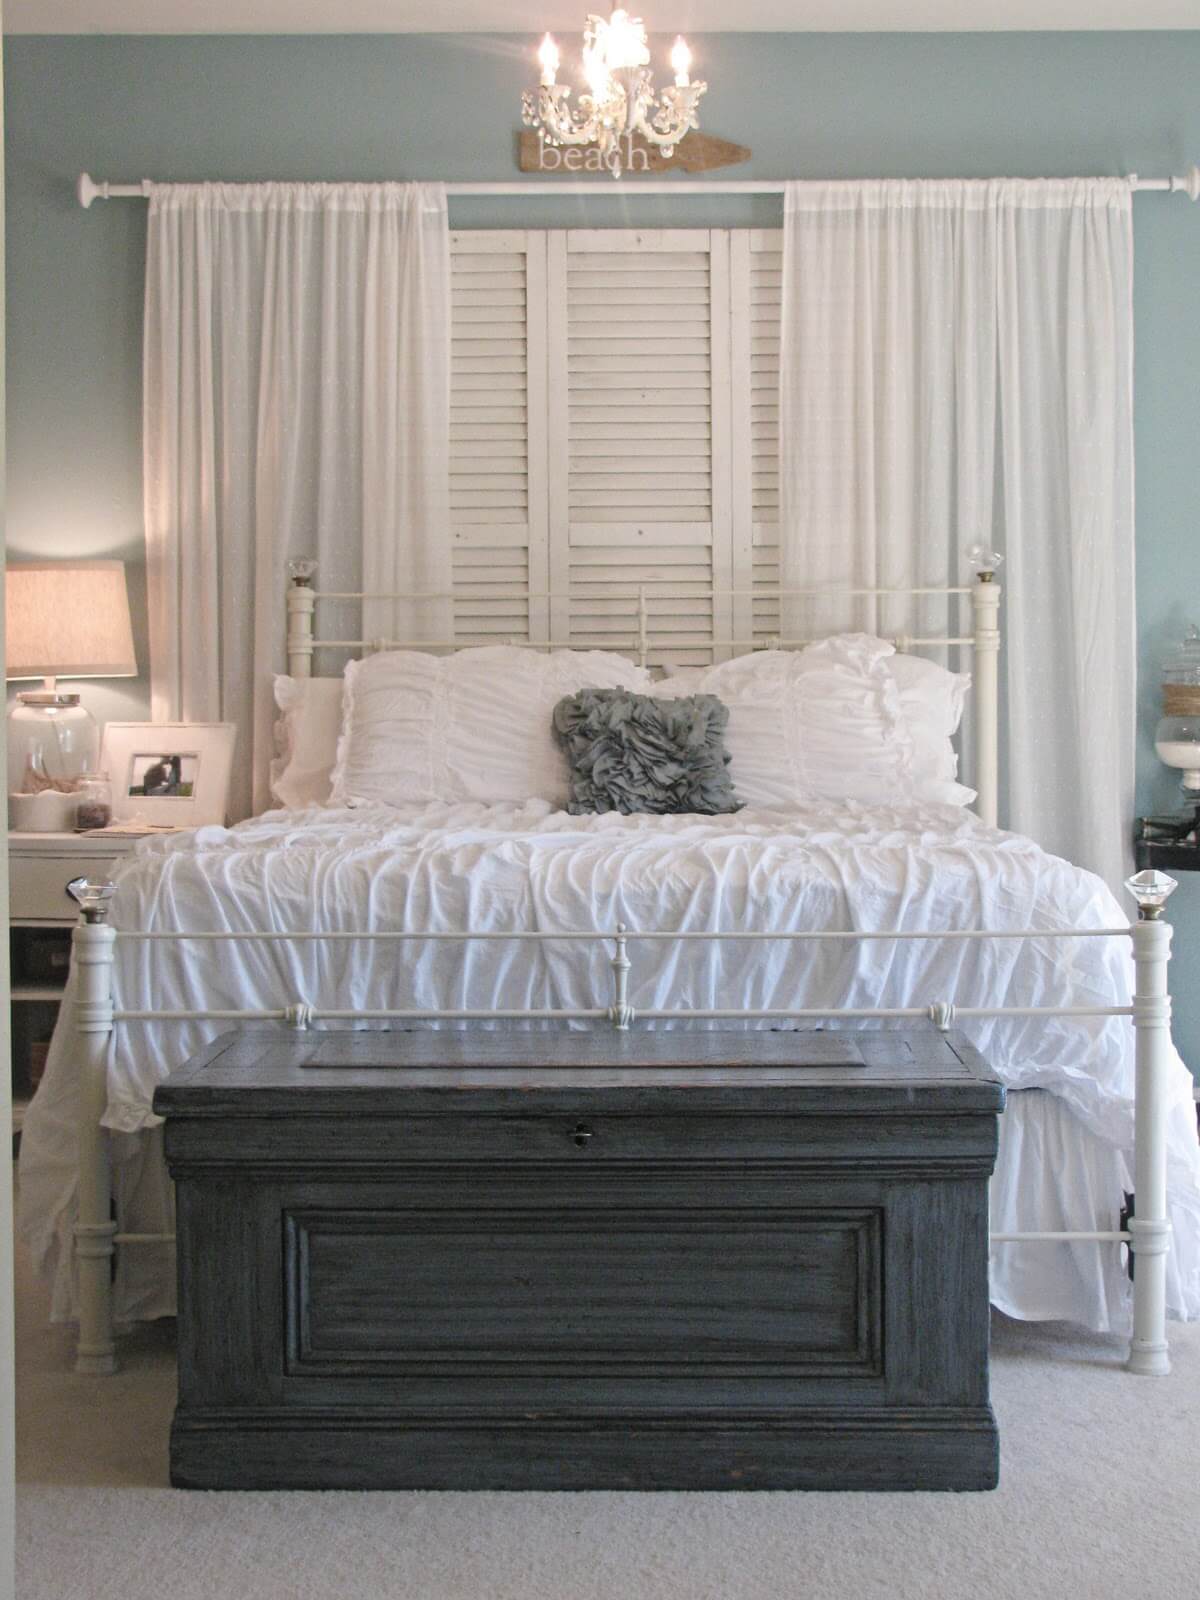 DIY Home Decor: 18 Ways to Repurpose Old Shutters